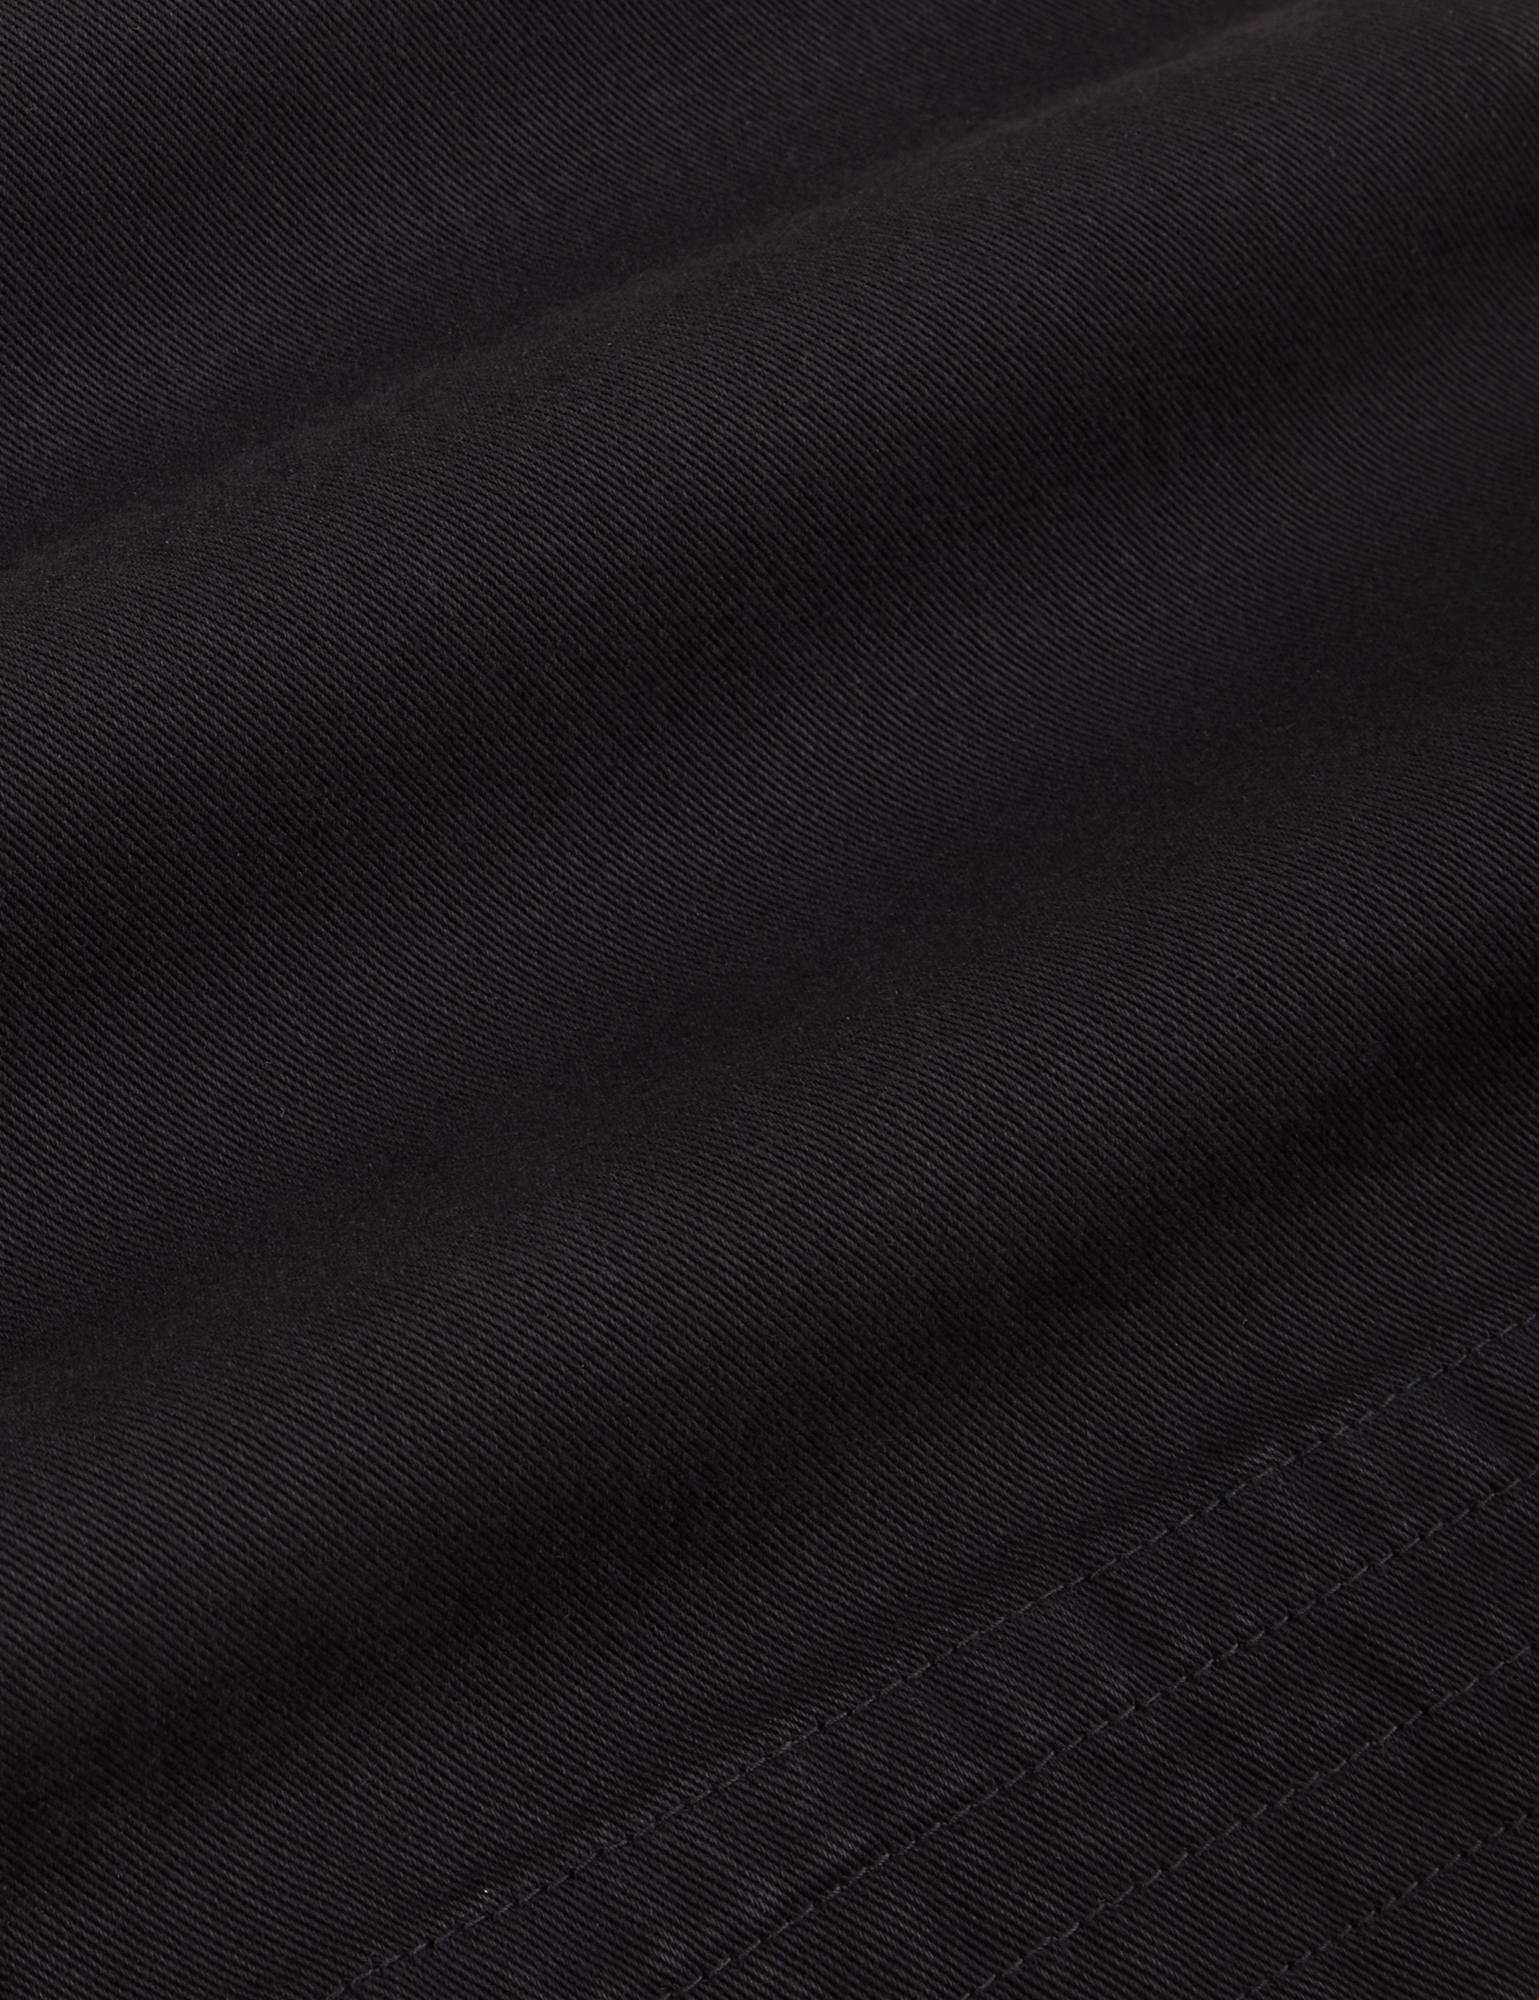 Action Pants in Basic Black fabric detail close up